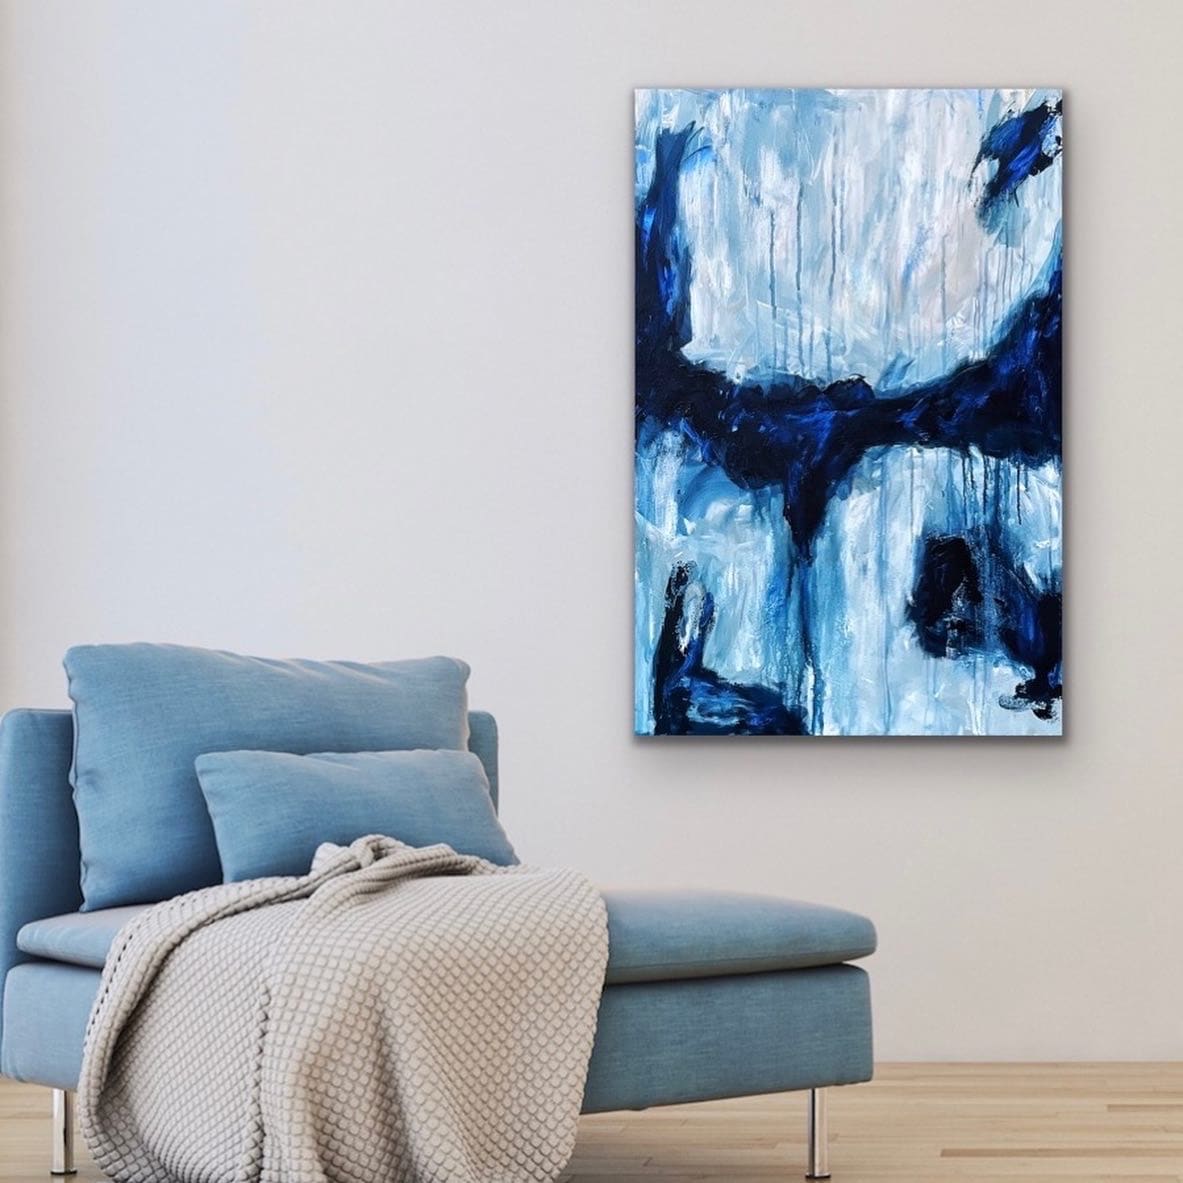 "Bluejean" by Dawn South  Image: “Bluejean”
24″ x 36″ acrylic on gallery wrapped canvas